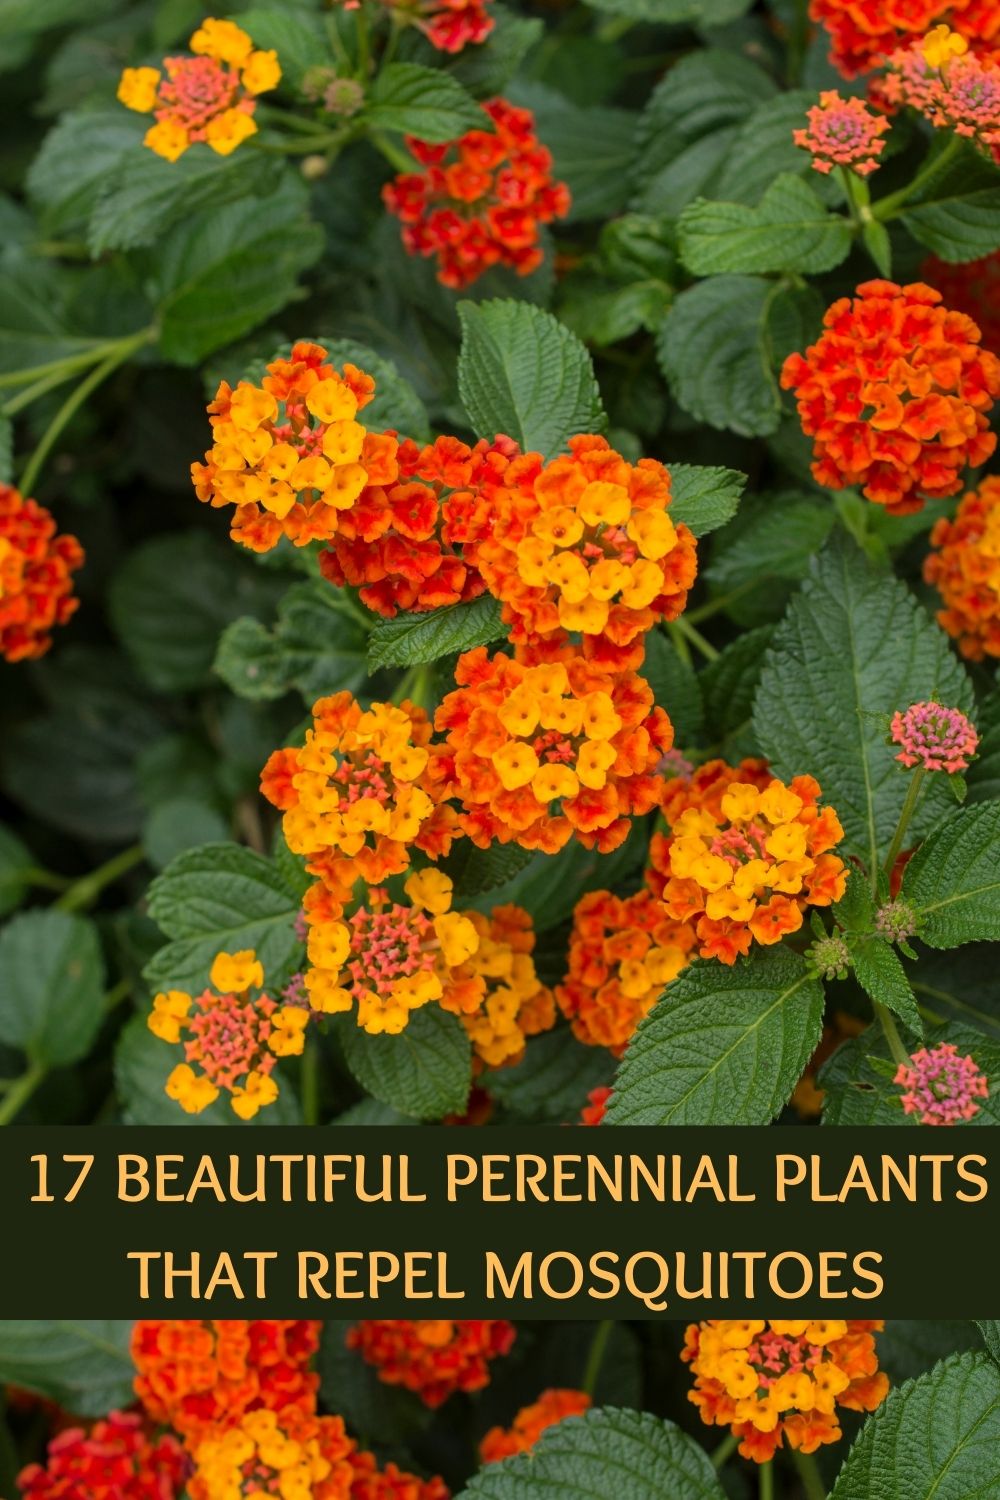 17 beautiful perennial plants that repel mosquitoes